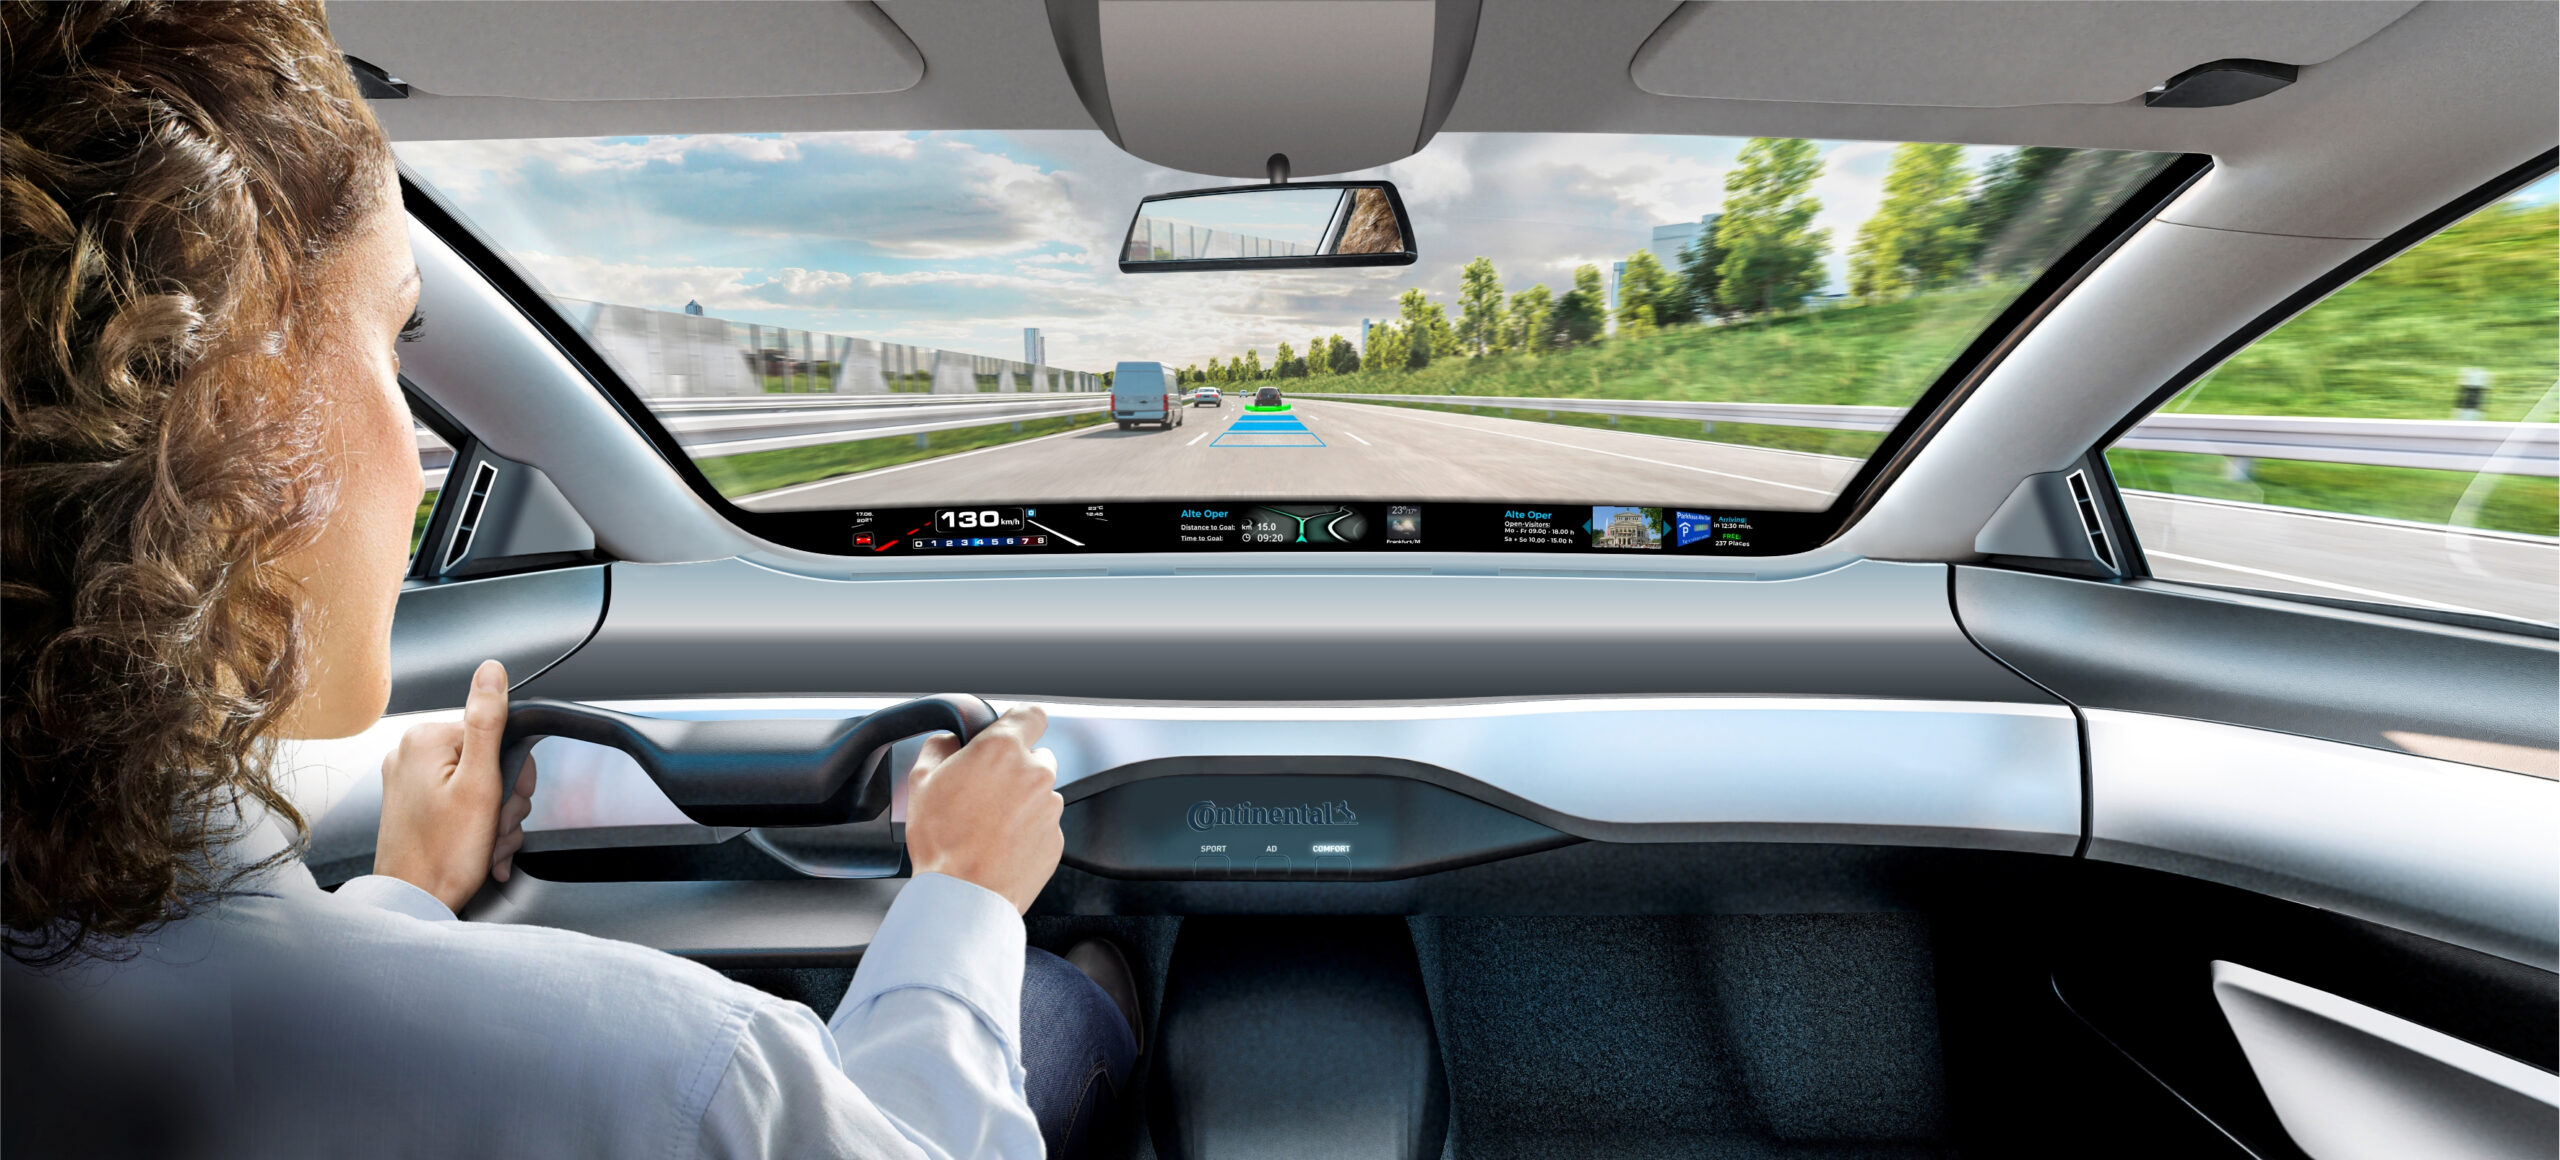 Continental Scenic View HUD Named CES Innovation Award Honoree | THE SHOP